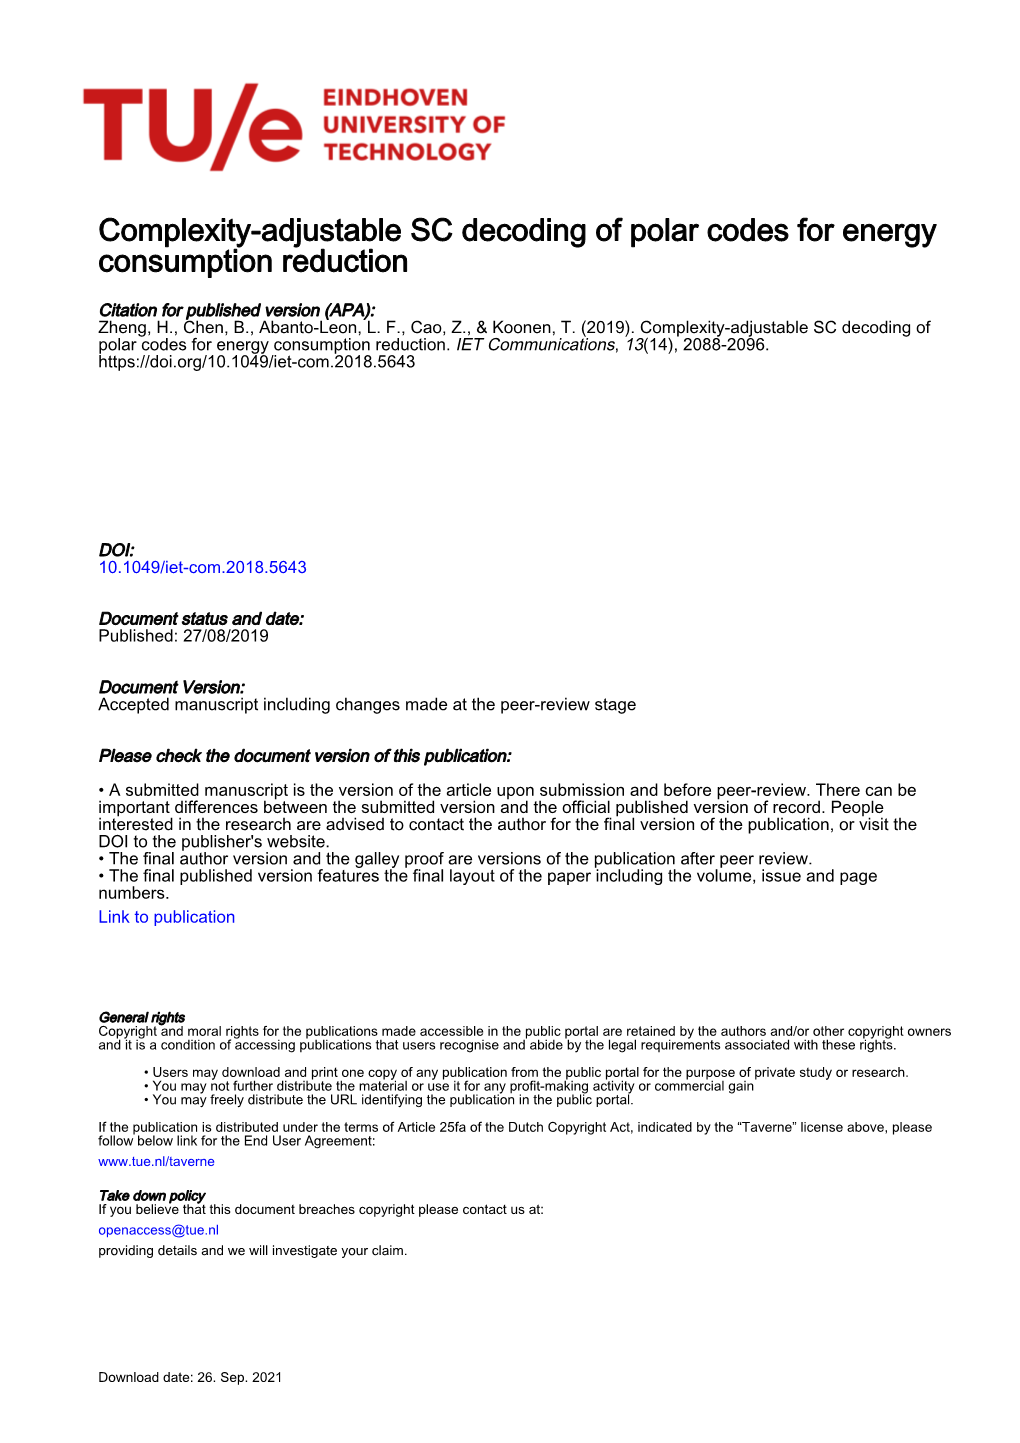 Complexity-Adjustable SC Decoding of Polar Codes for Energy Consumption Reduction